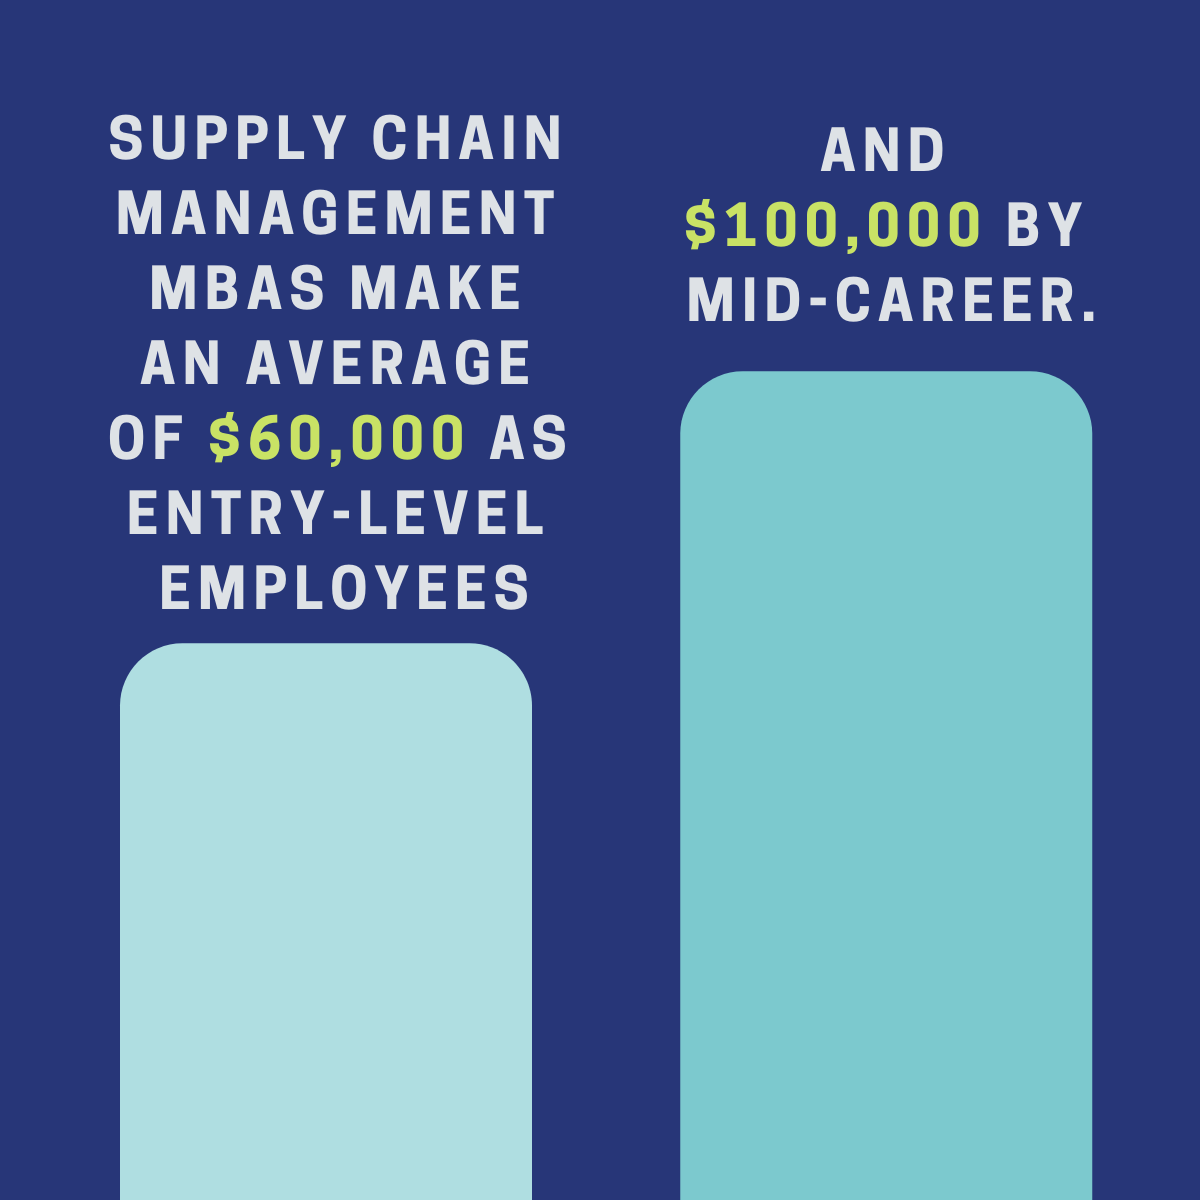 Supply chain management MBAs make an average of $60,000 as entry-level employees and $100,000 by mid-career.